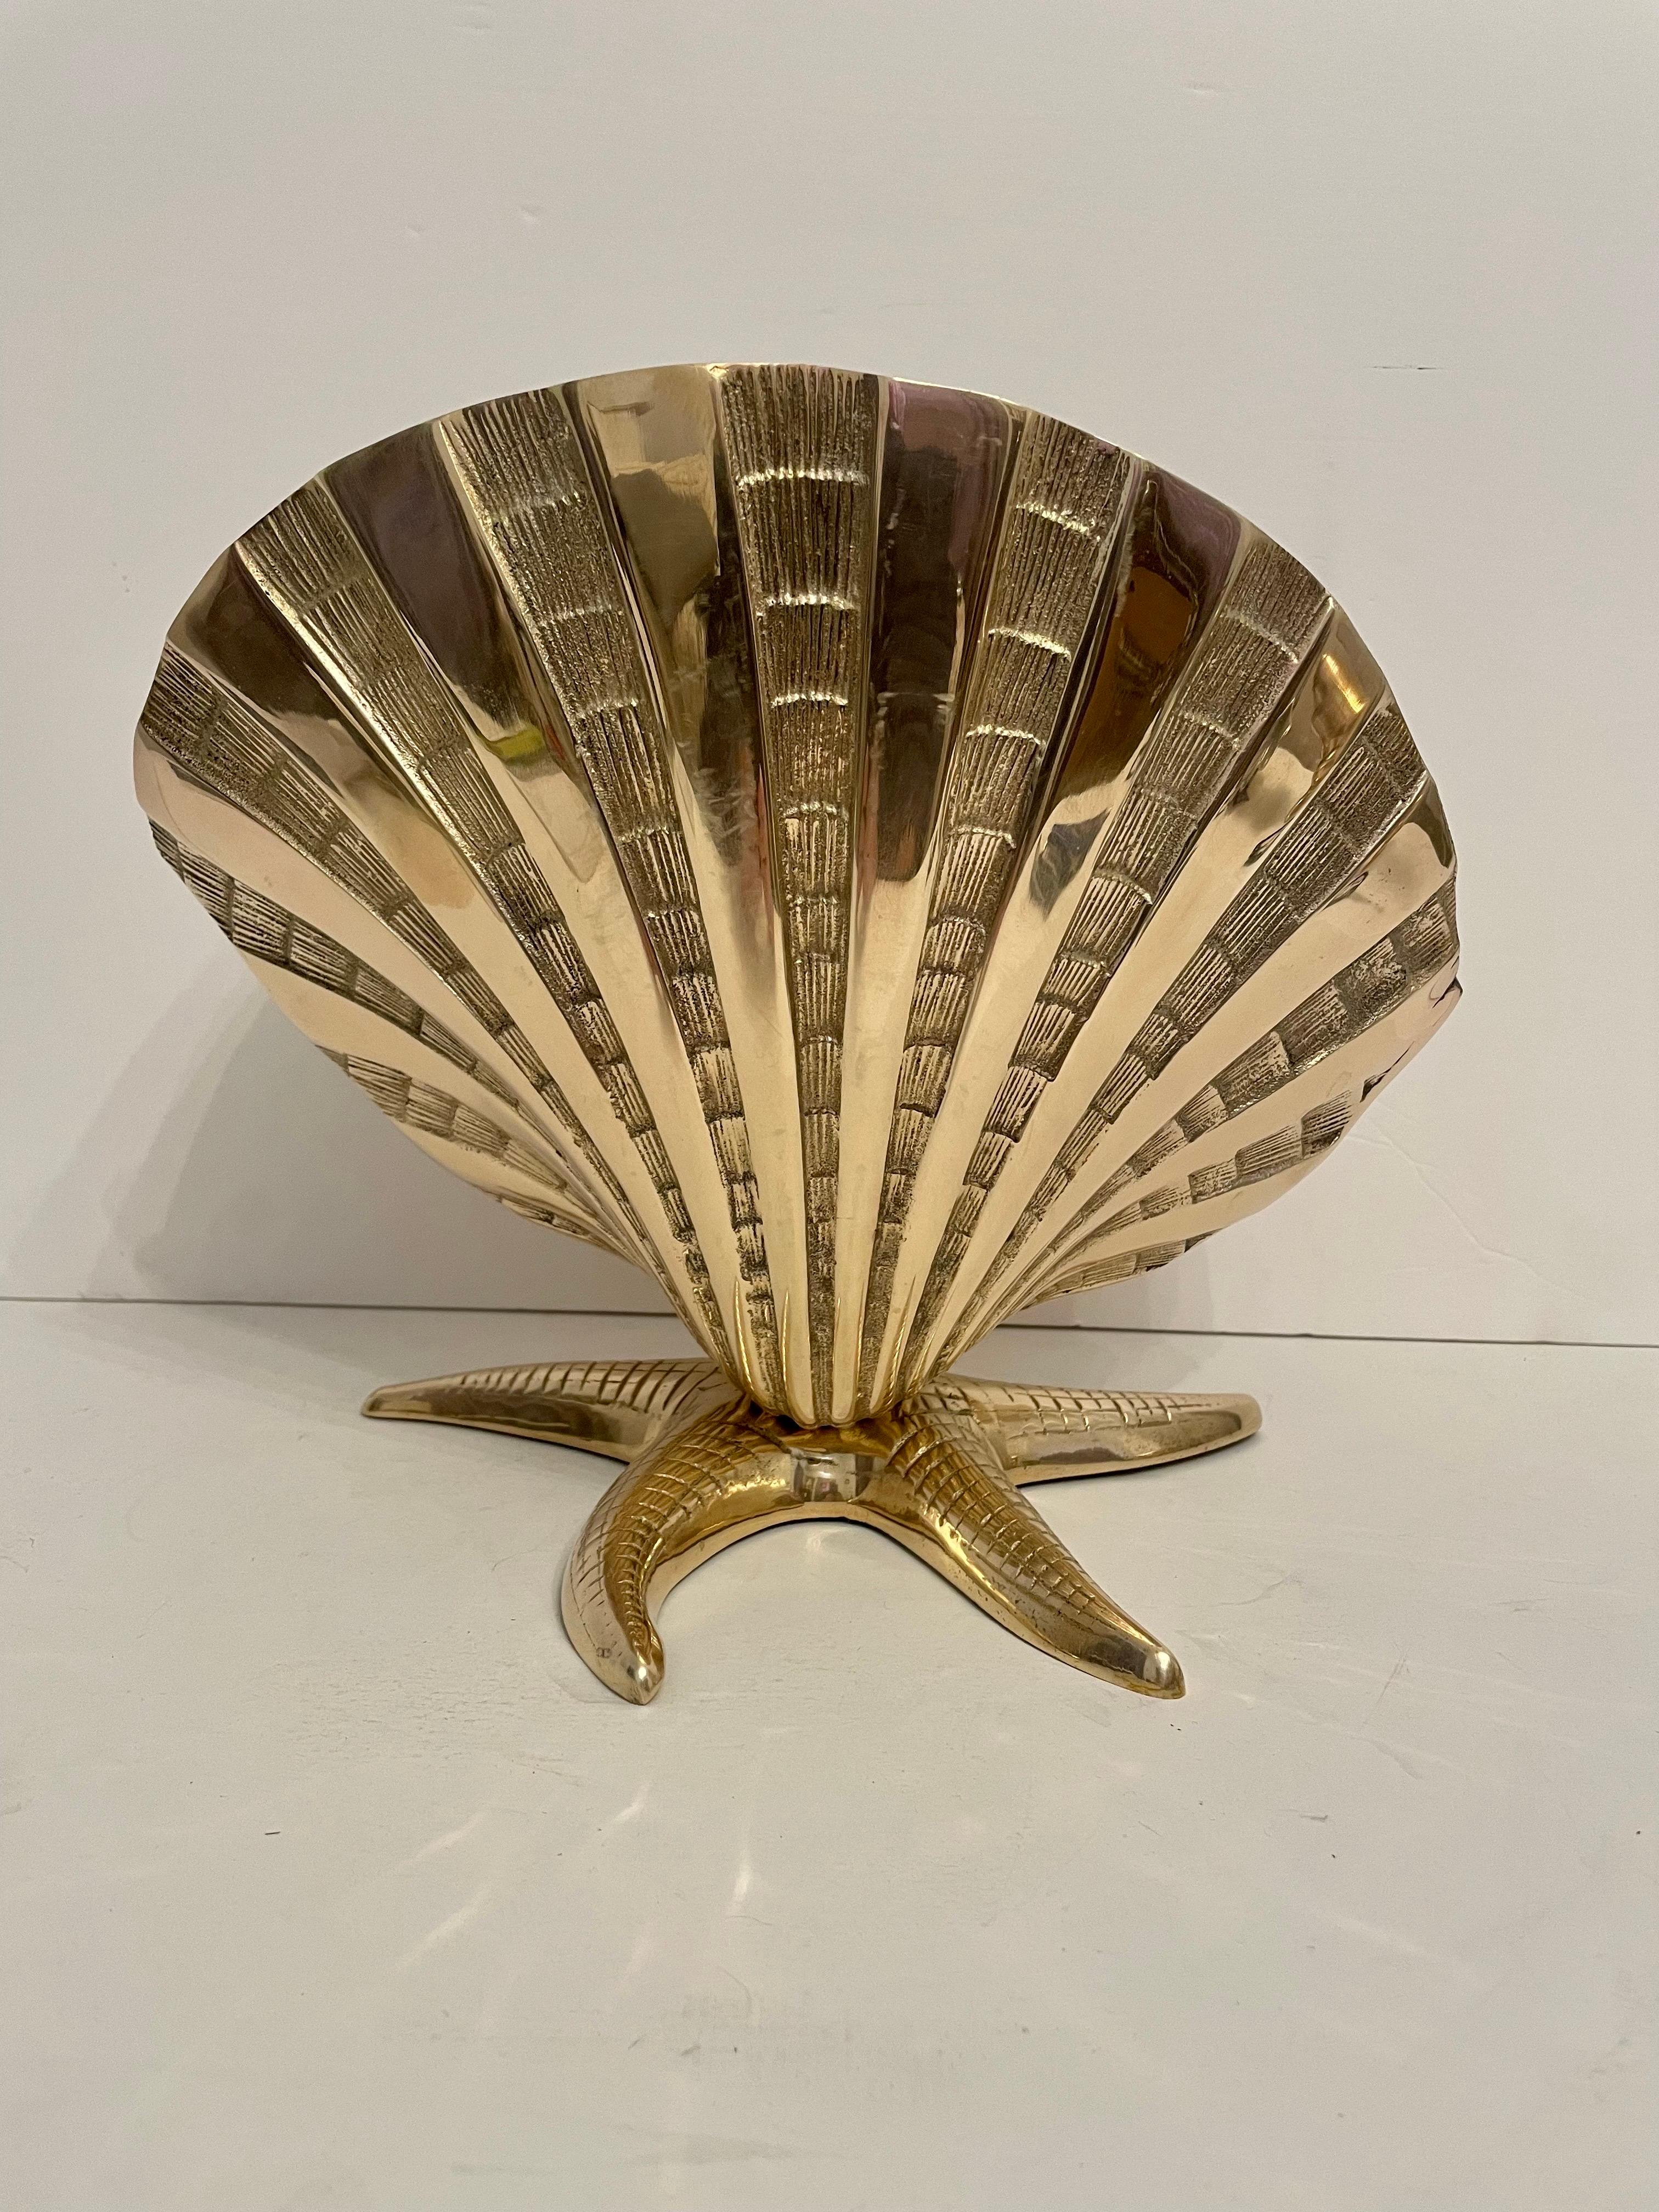 Giant Brass Nautical Clam Shell Seashell on Starfish Base Planter Sculpture For Sale 7